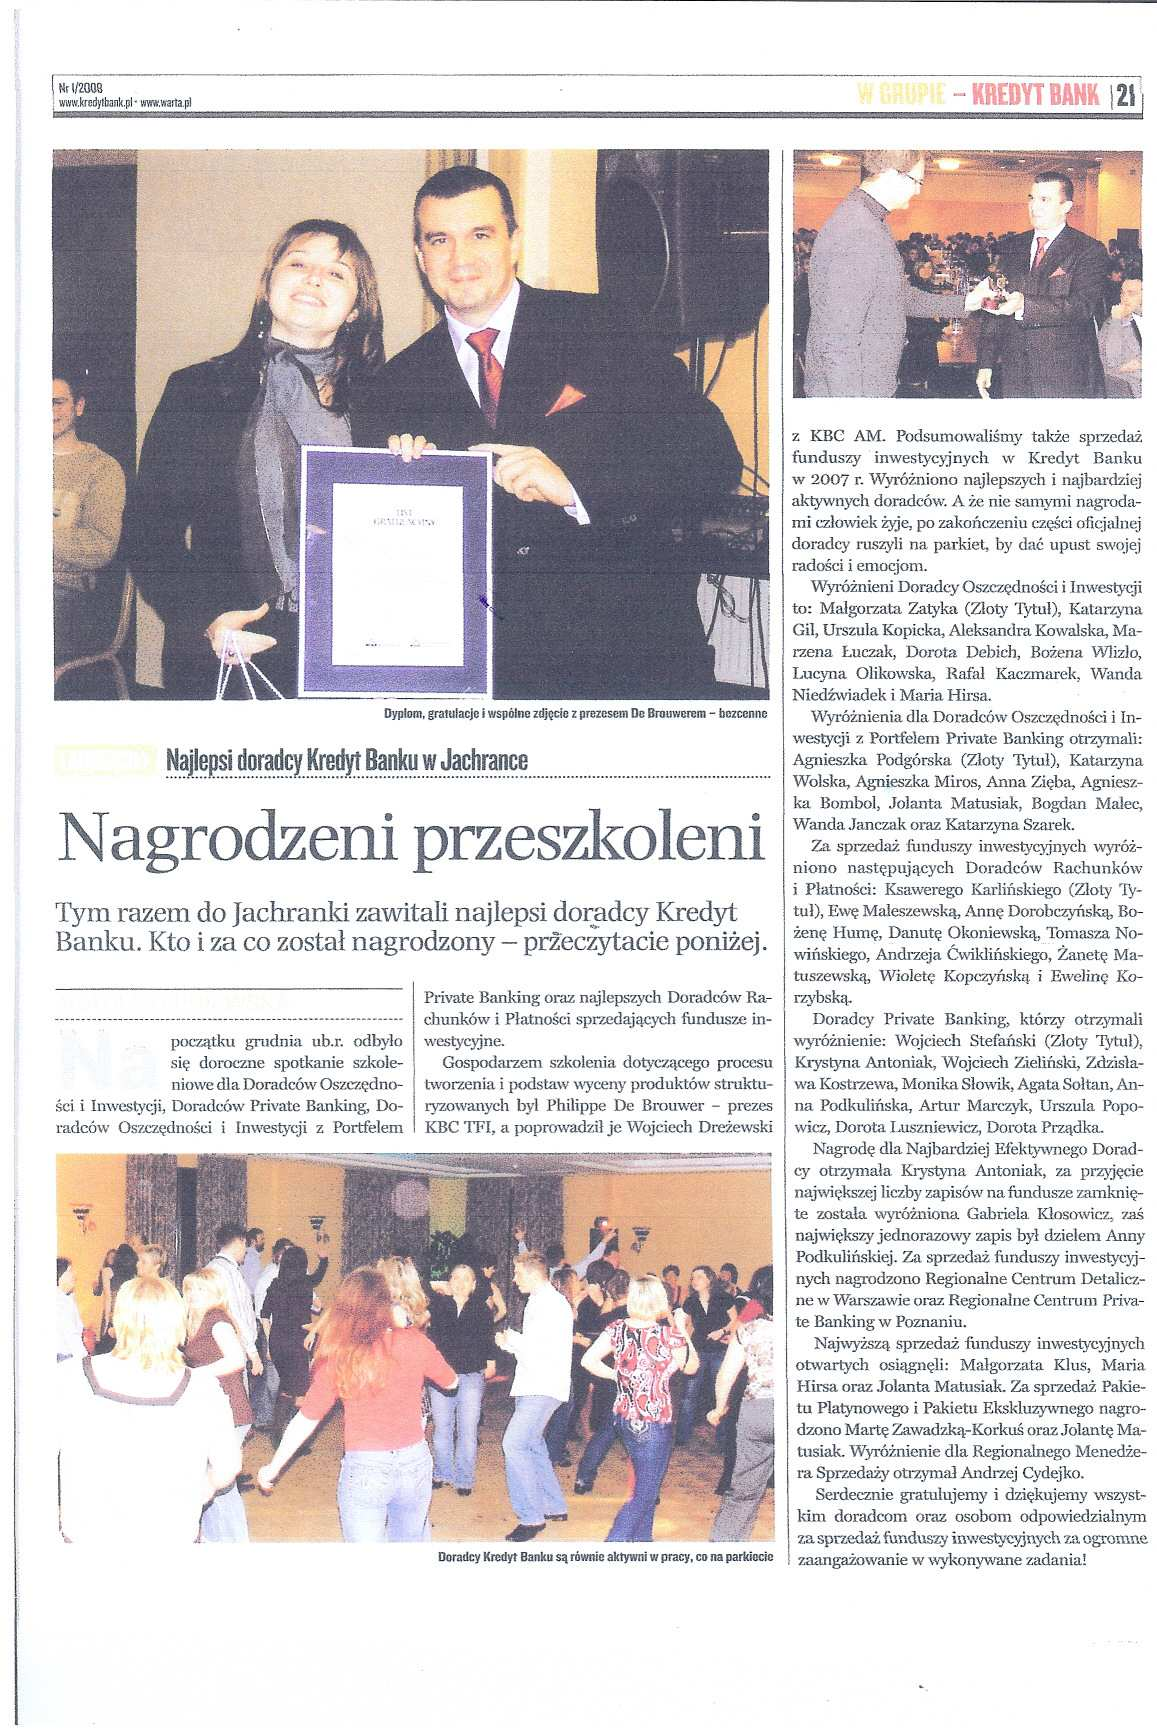 10 Kabeceusz 2008/I The internal magazine of KBC Group in Poland reports on prices that where handed over by Philippe De